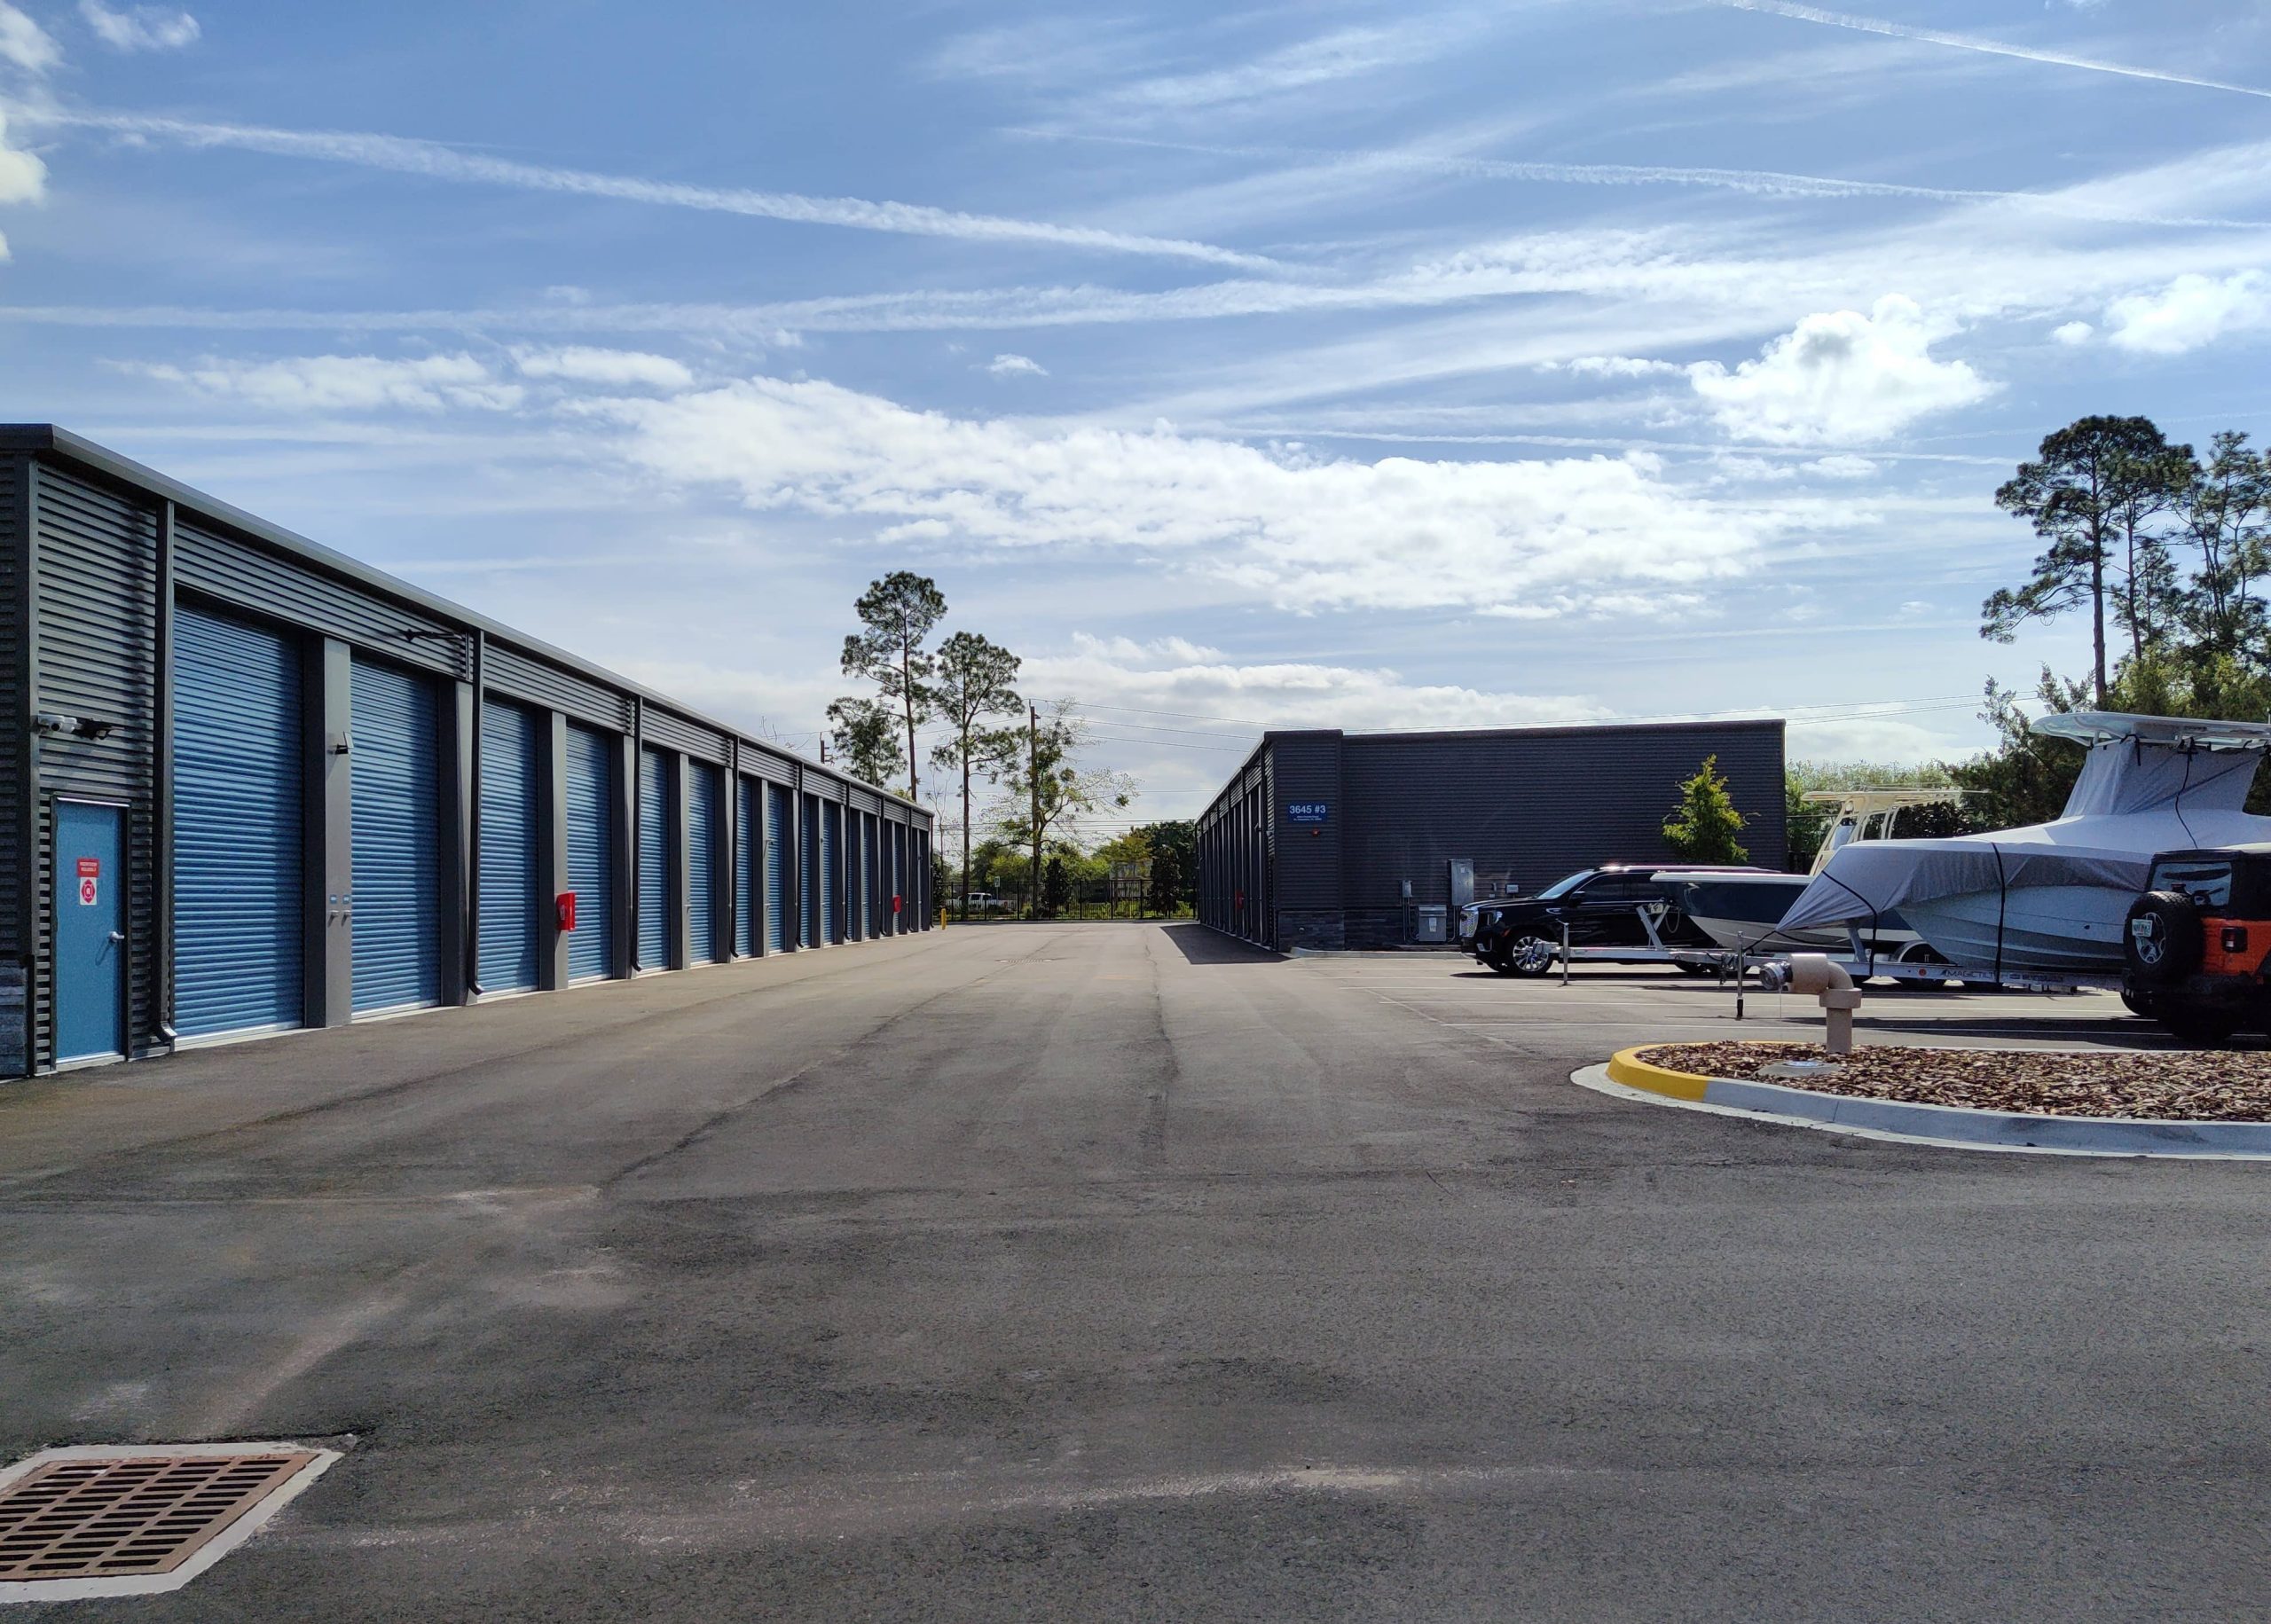 Outside drive-up storage units on the left and to the right shows outdoor vehicle parking with RVs, Boats, Cars, and Trucks present